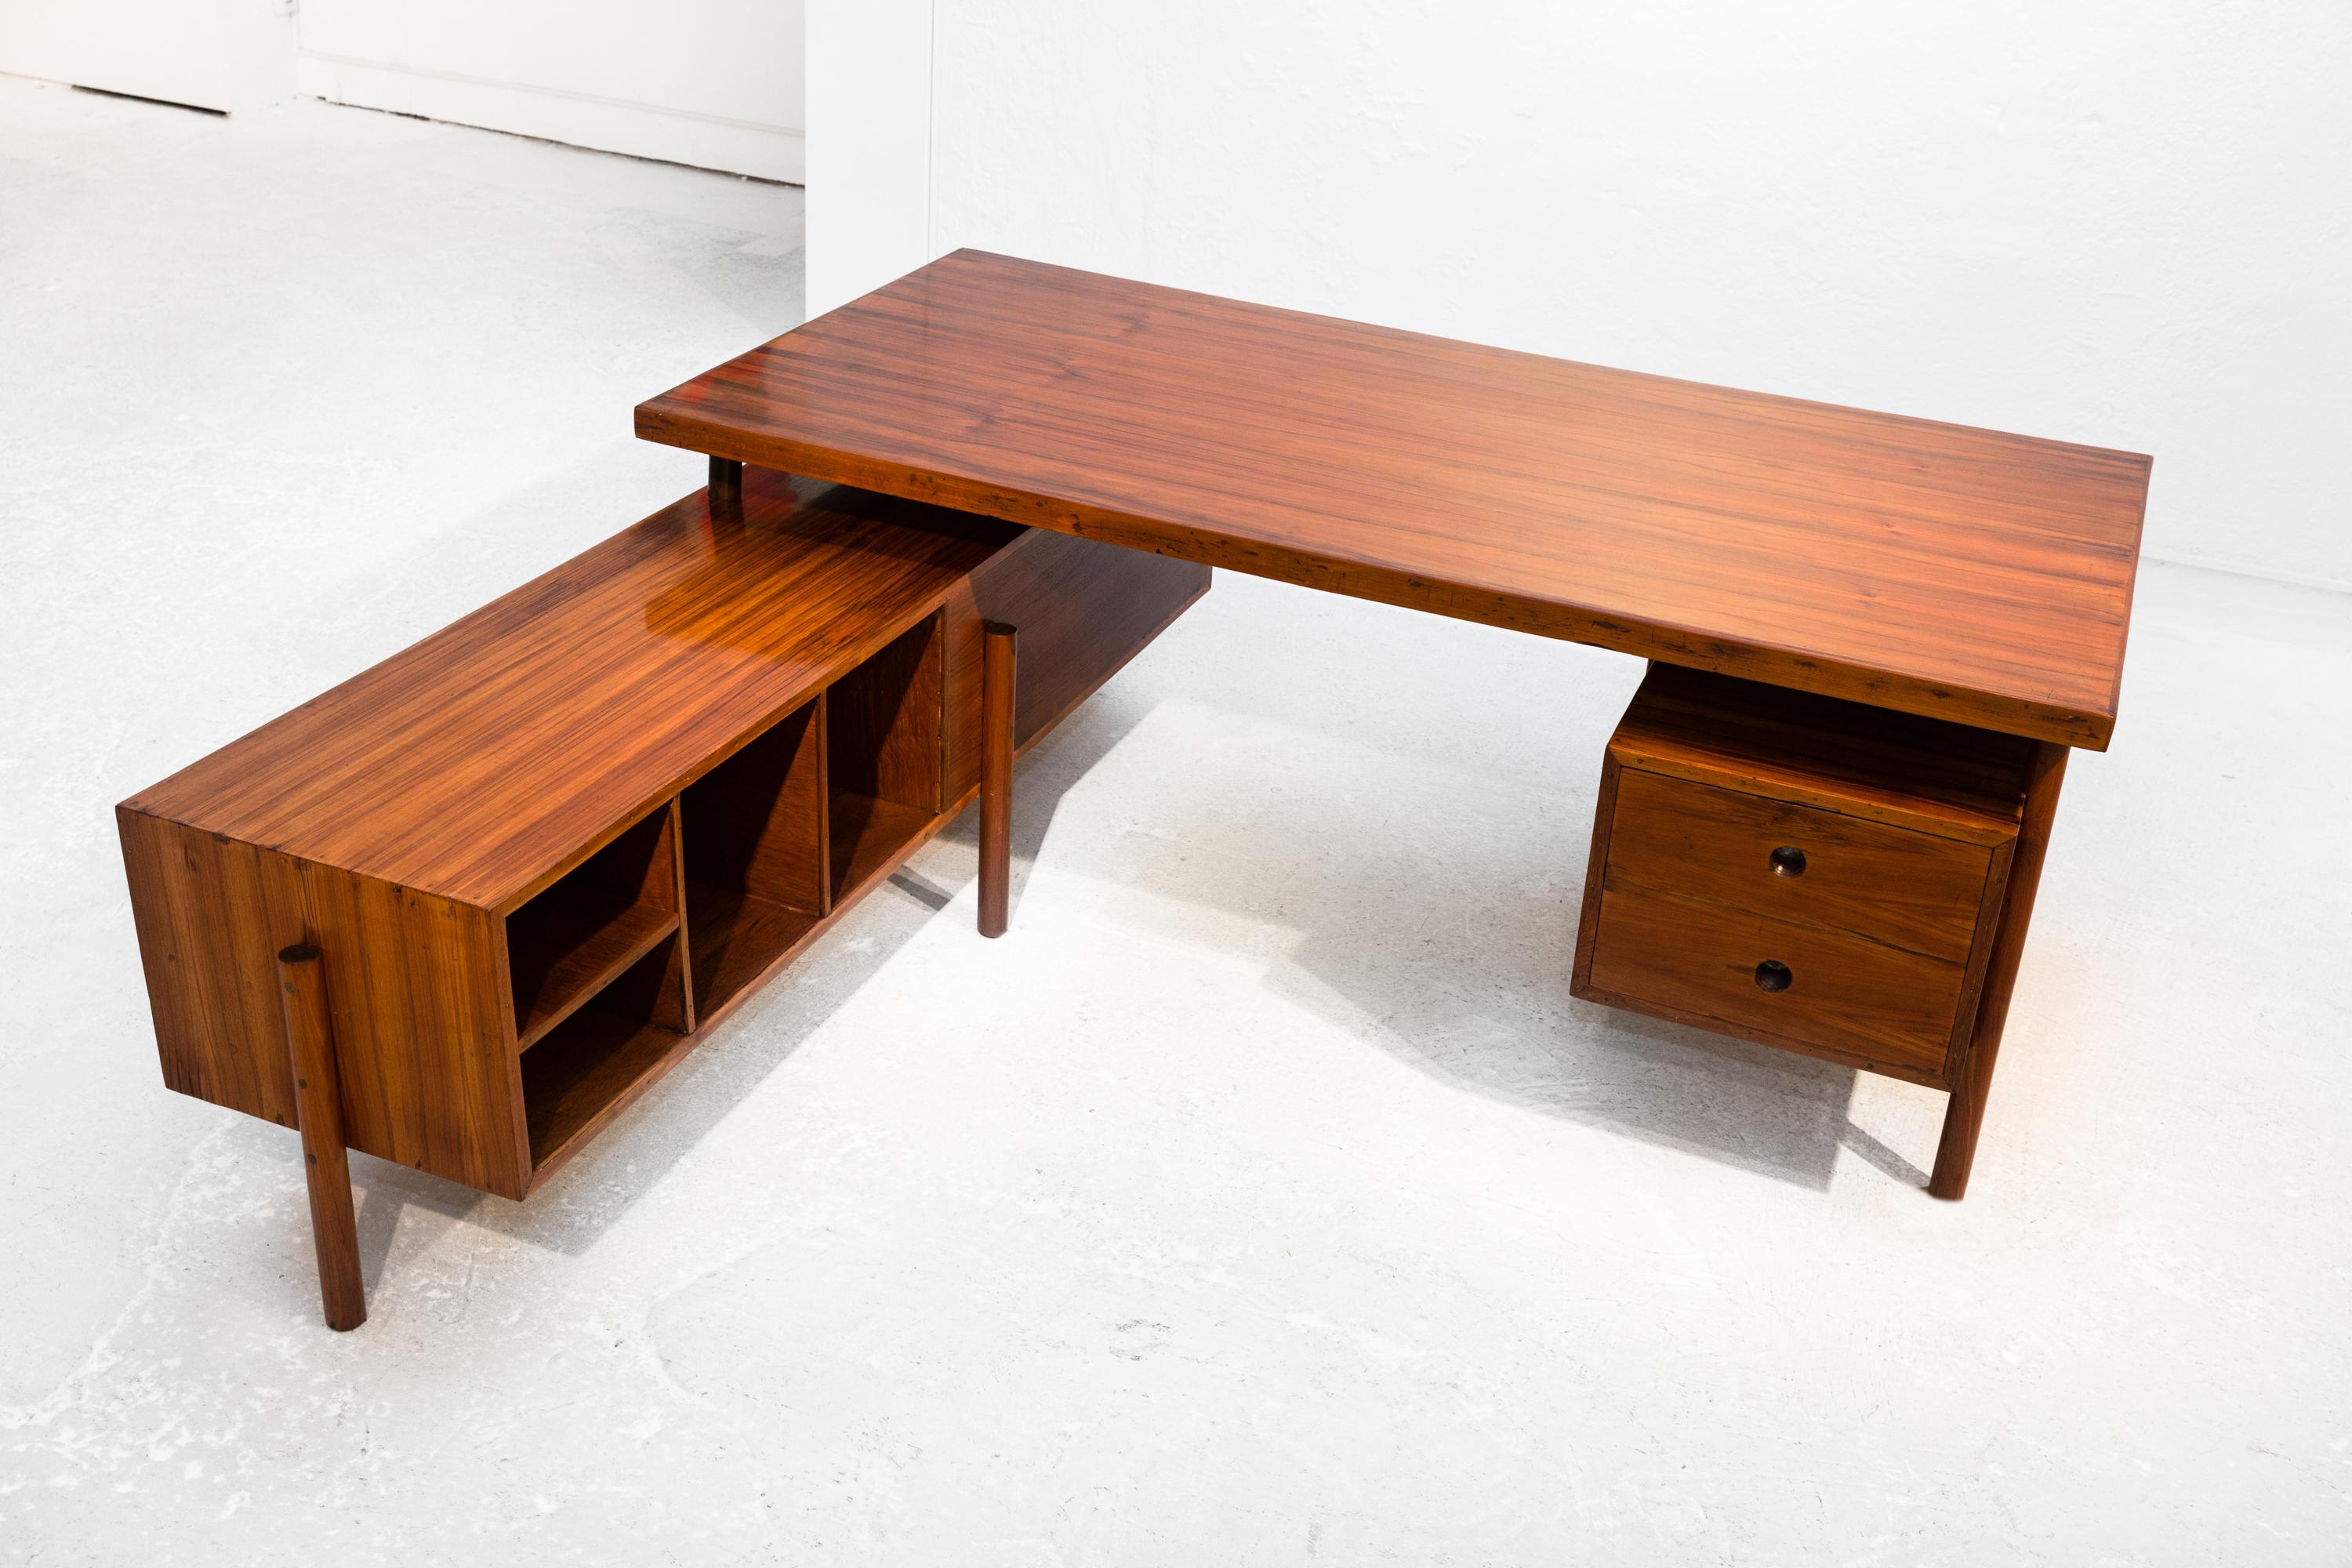 Large administrative desk by Pierre Jeanneret, original, 1957-58, PJ-BU-15-A. Solid teak and teak veneer, carefully restored. Designed for the administrative buildings of Chandigarh, India. 
The tabletop lies on two double-sided bases; one longer